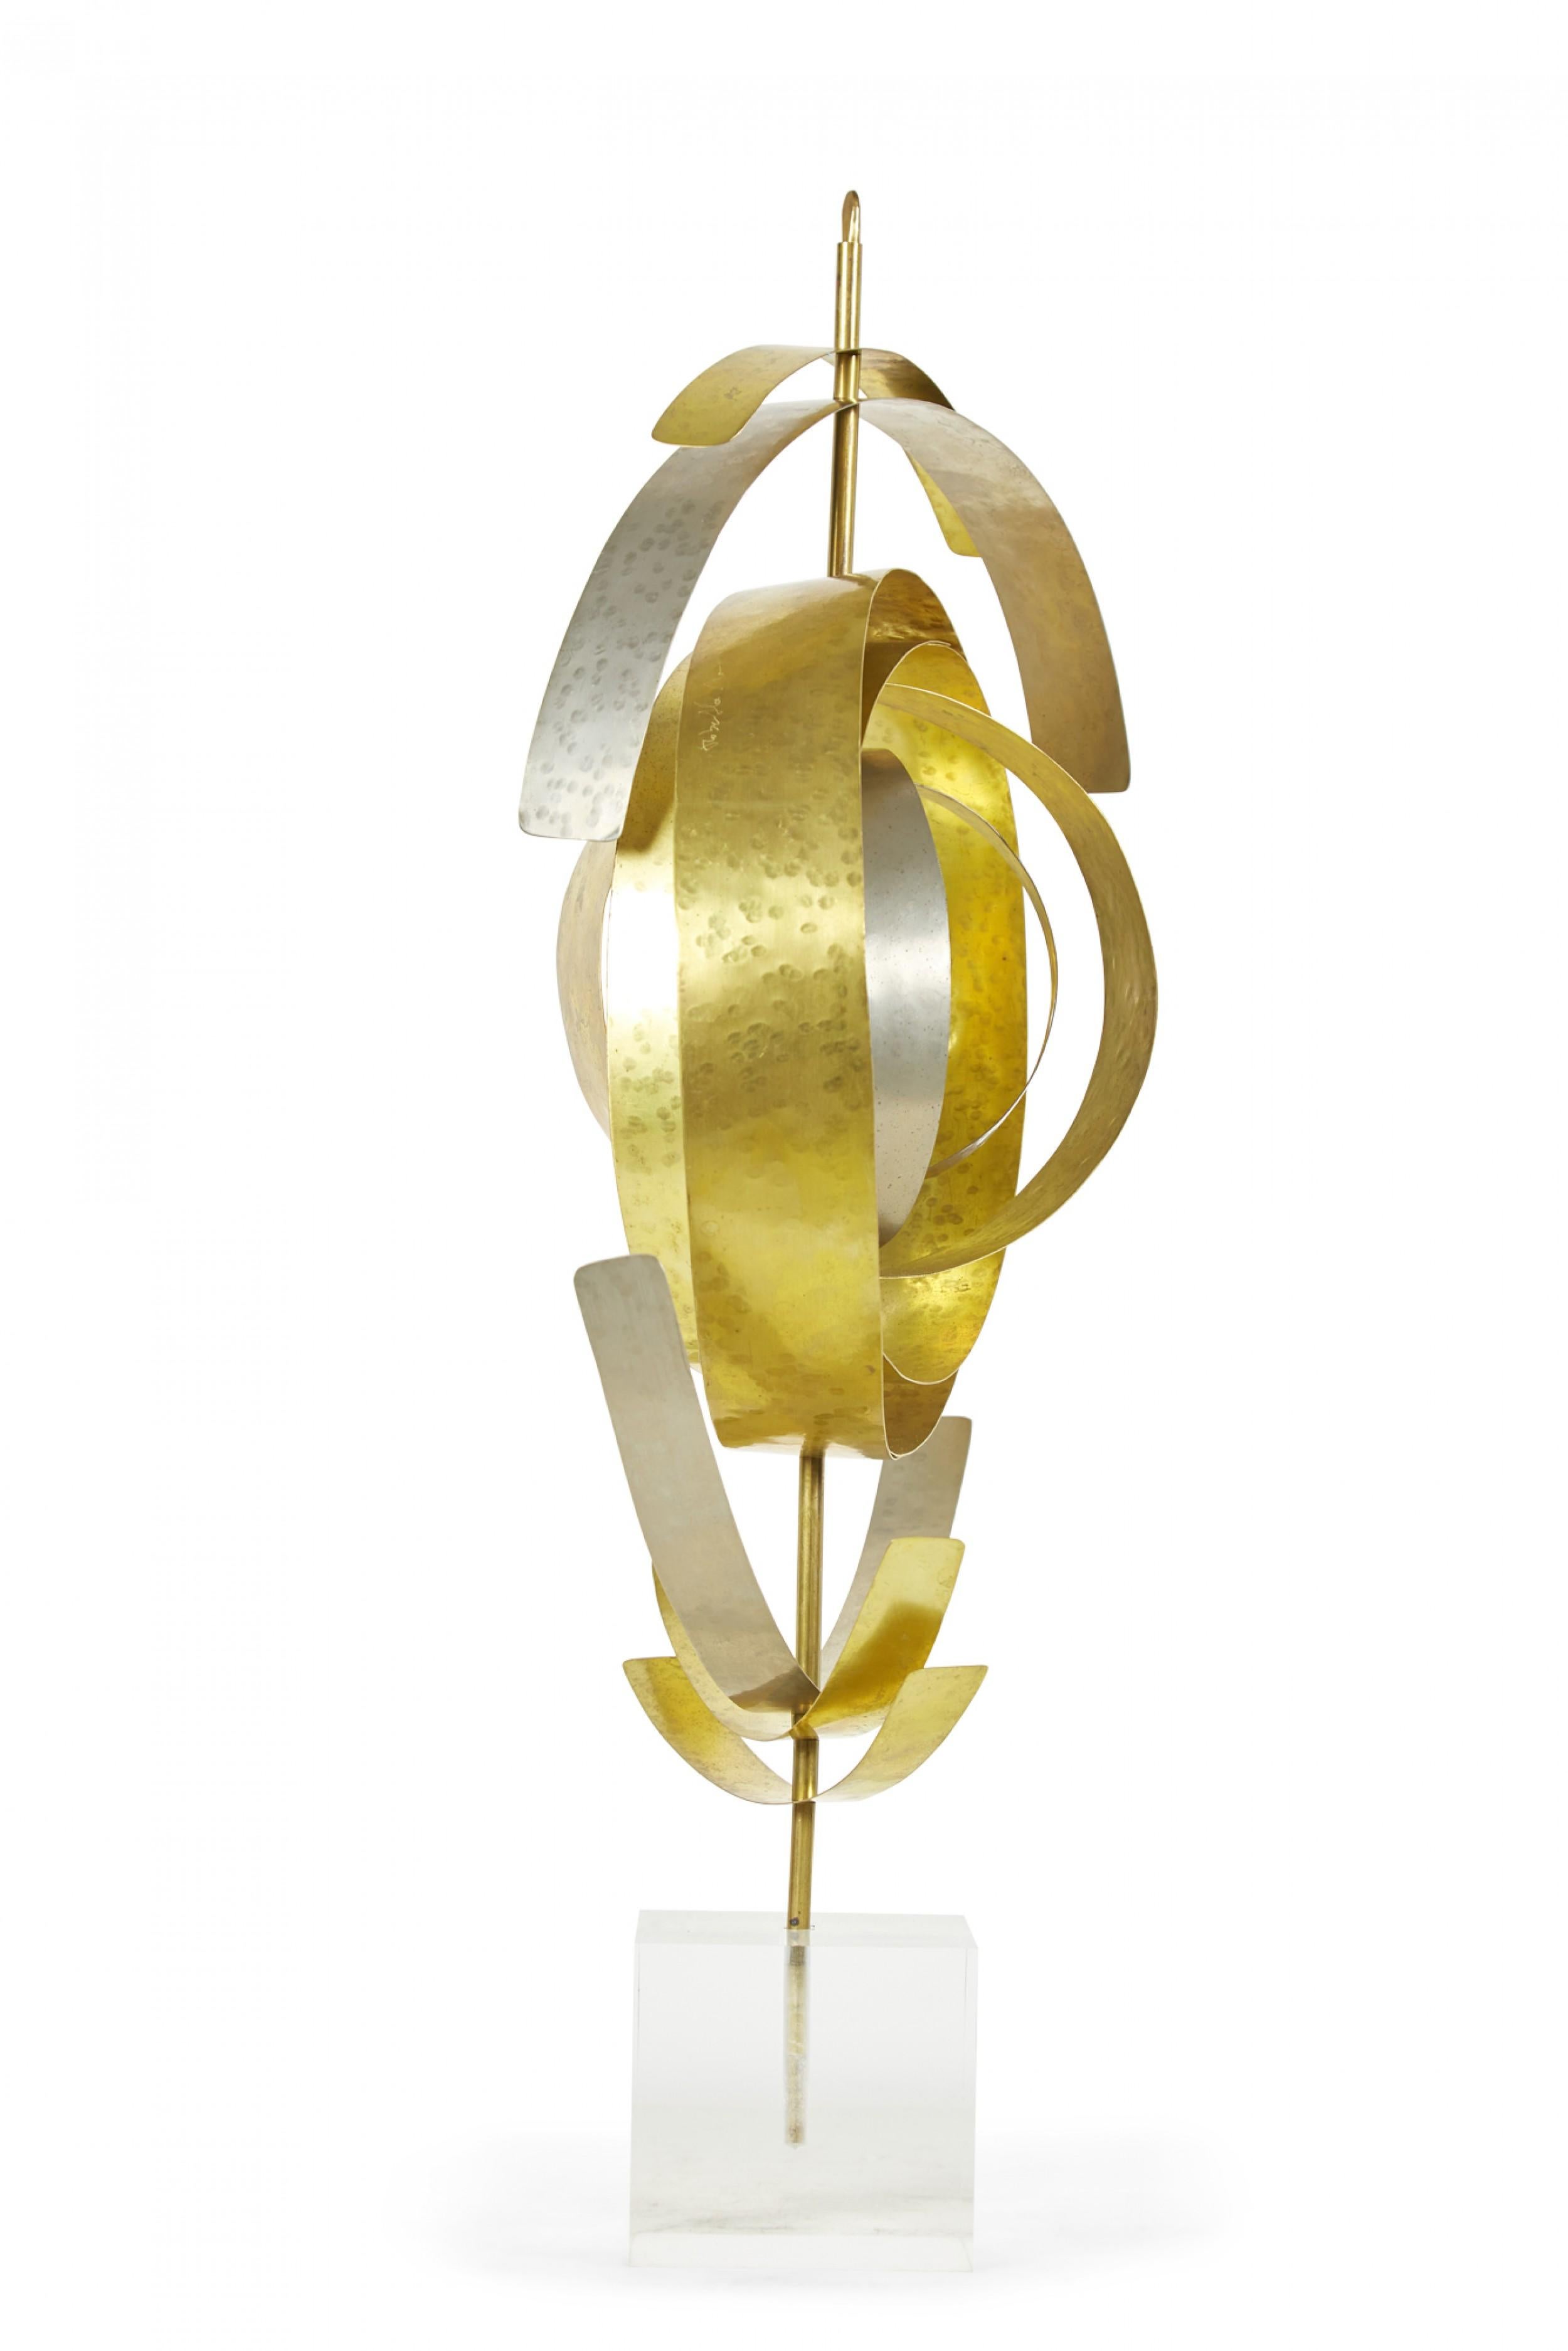 Contemporary abstract sculpture comprised of a many curved hammered nickel and brass pieces mounted on a movable spiraling pattern on a brass rod anchored in a lucite base titled, 